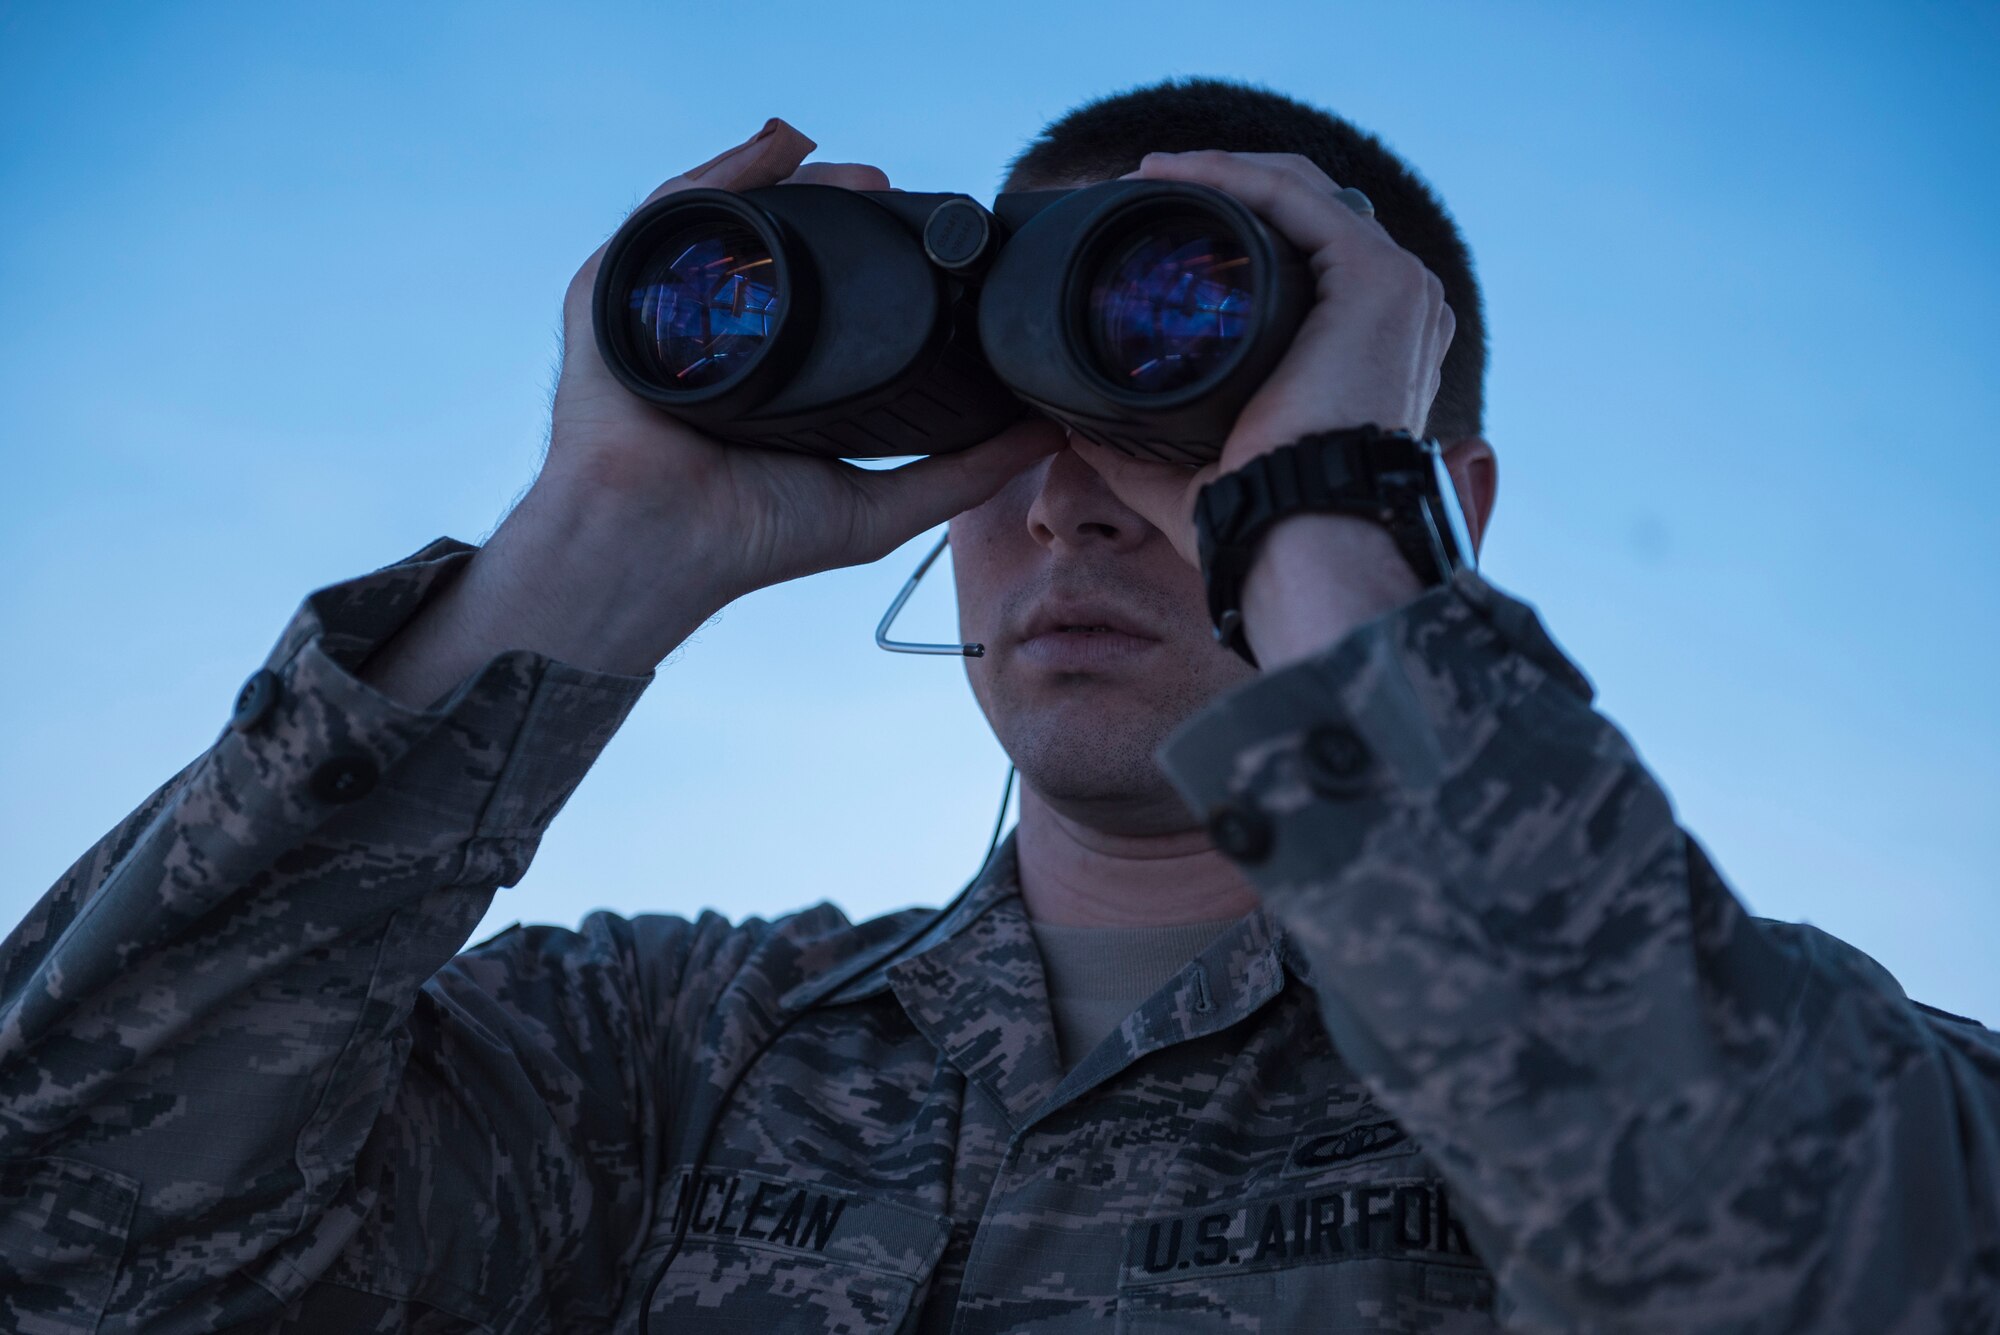 U.S. Air Force Senior Airman Samuel McLean, 20th Operations Support Squadron air traffic controller, looks for aircraft through binoculars at Shaw Air Force Base, S.C., April 5, 2018.